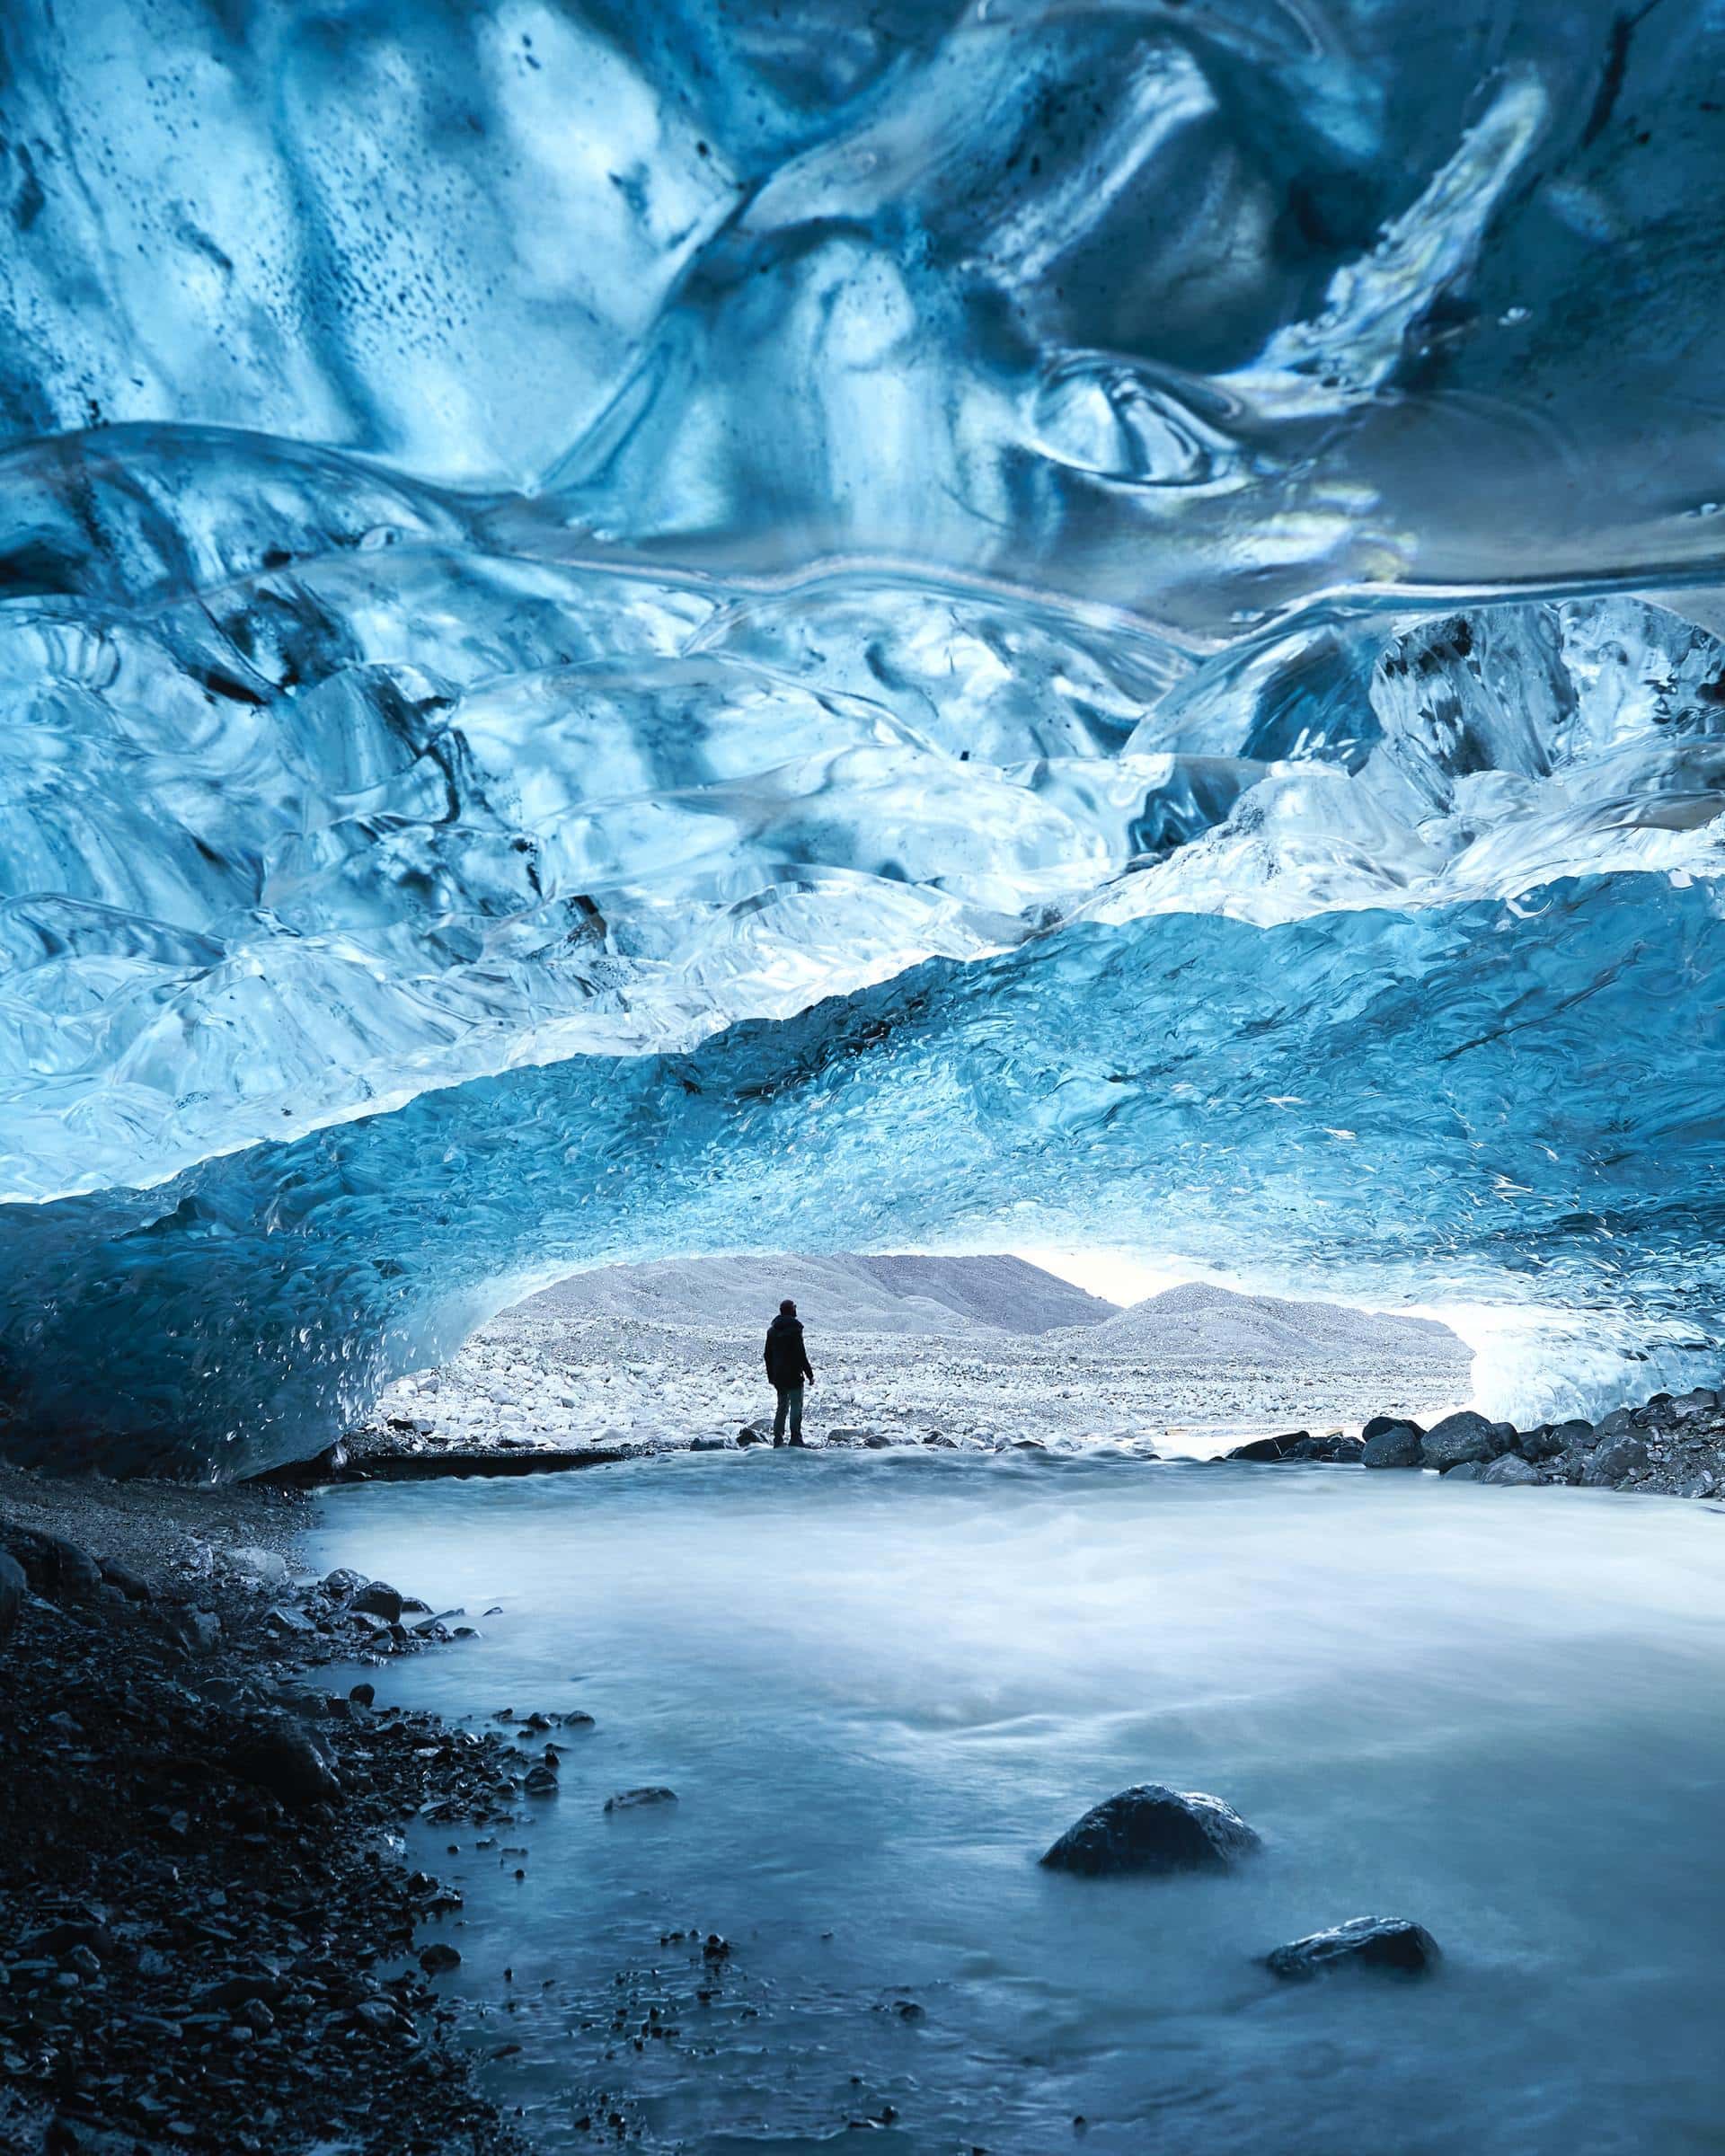 A person stands in the entrance of a huge cave, looking out. The cave ceiling is made of ice with light reflecting through.